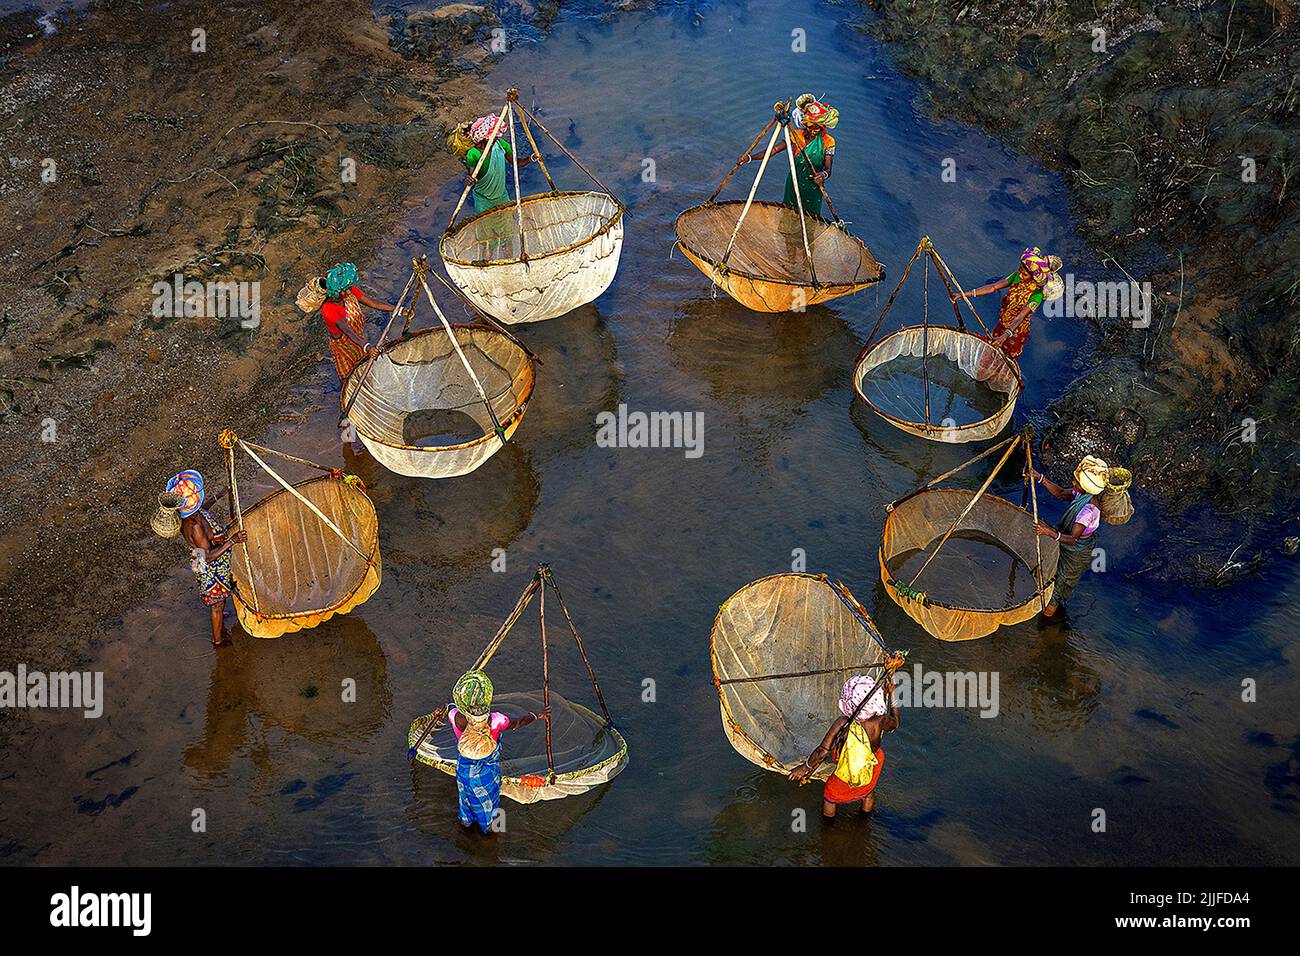 Small fish nets and baskets to catch fish. West Bengal, India: IMAGES show the beautifully intricate fishing practices in India with methods varying d Stock Photo